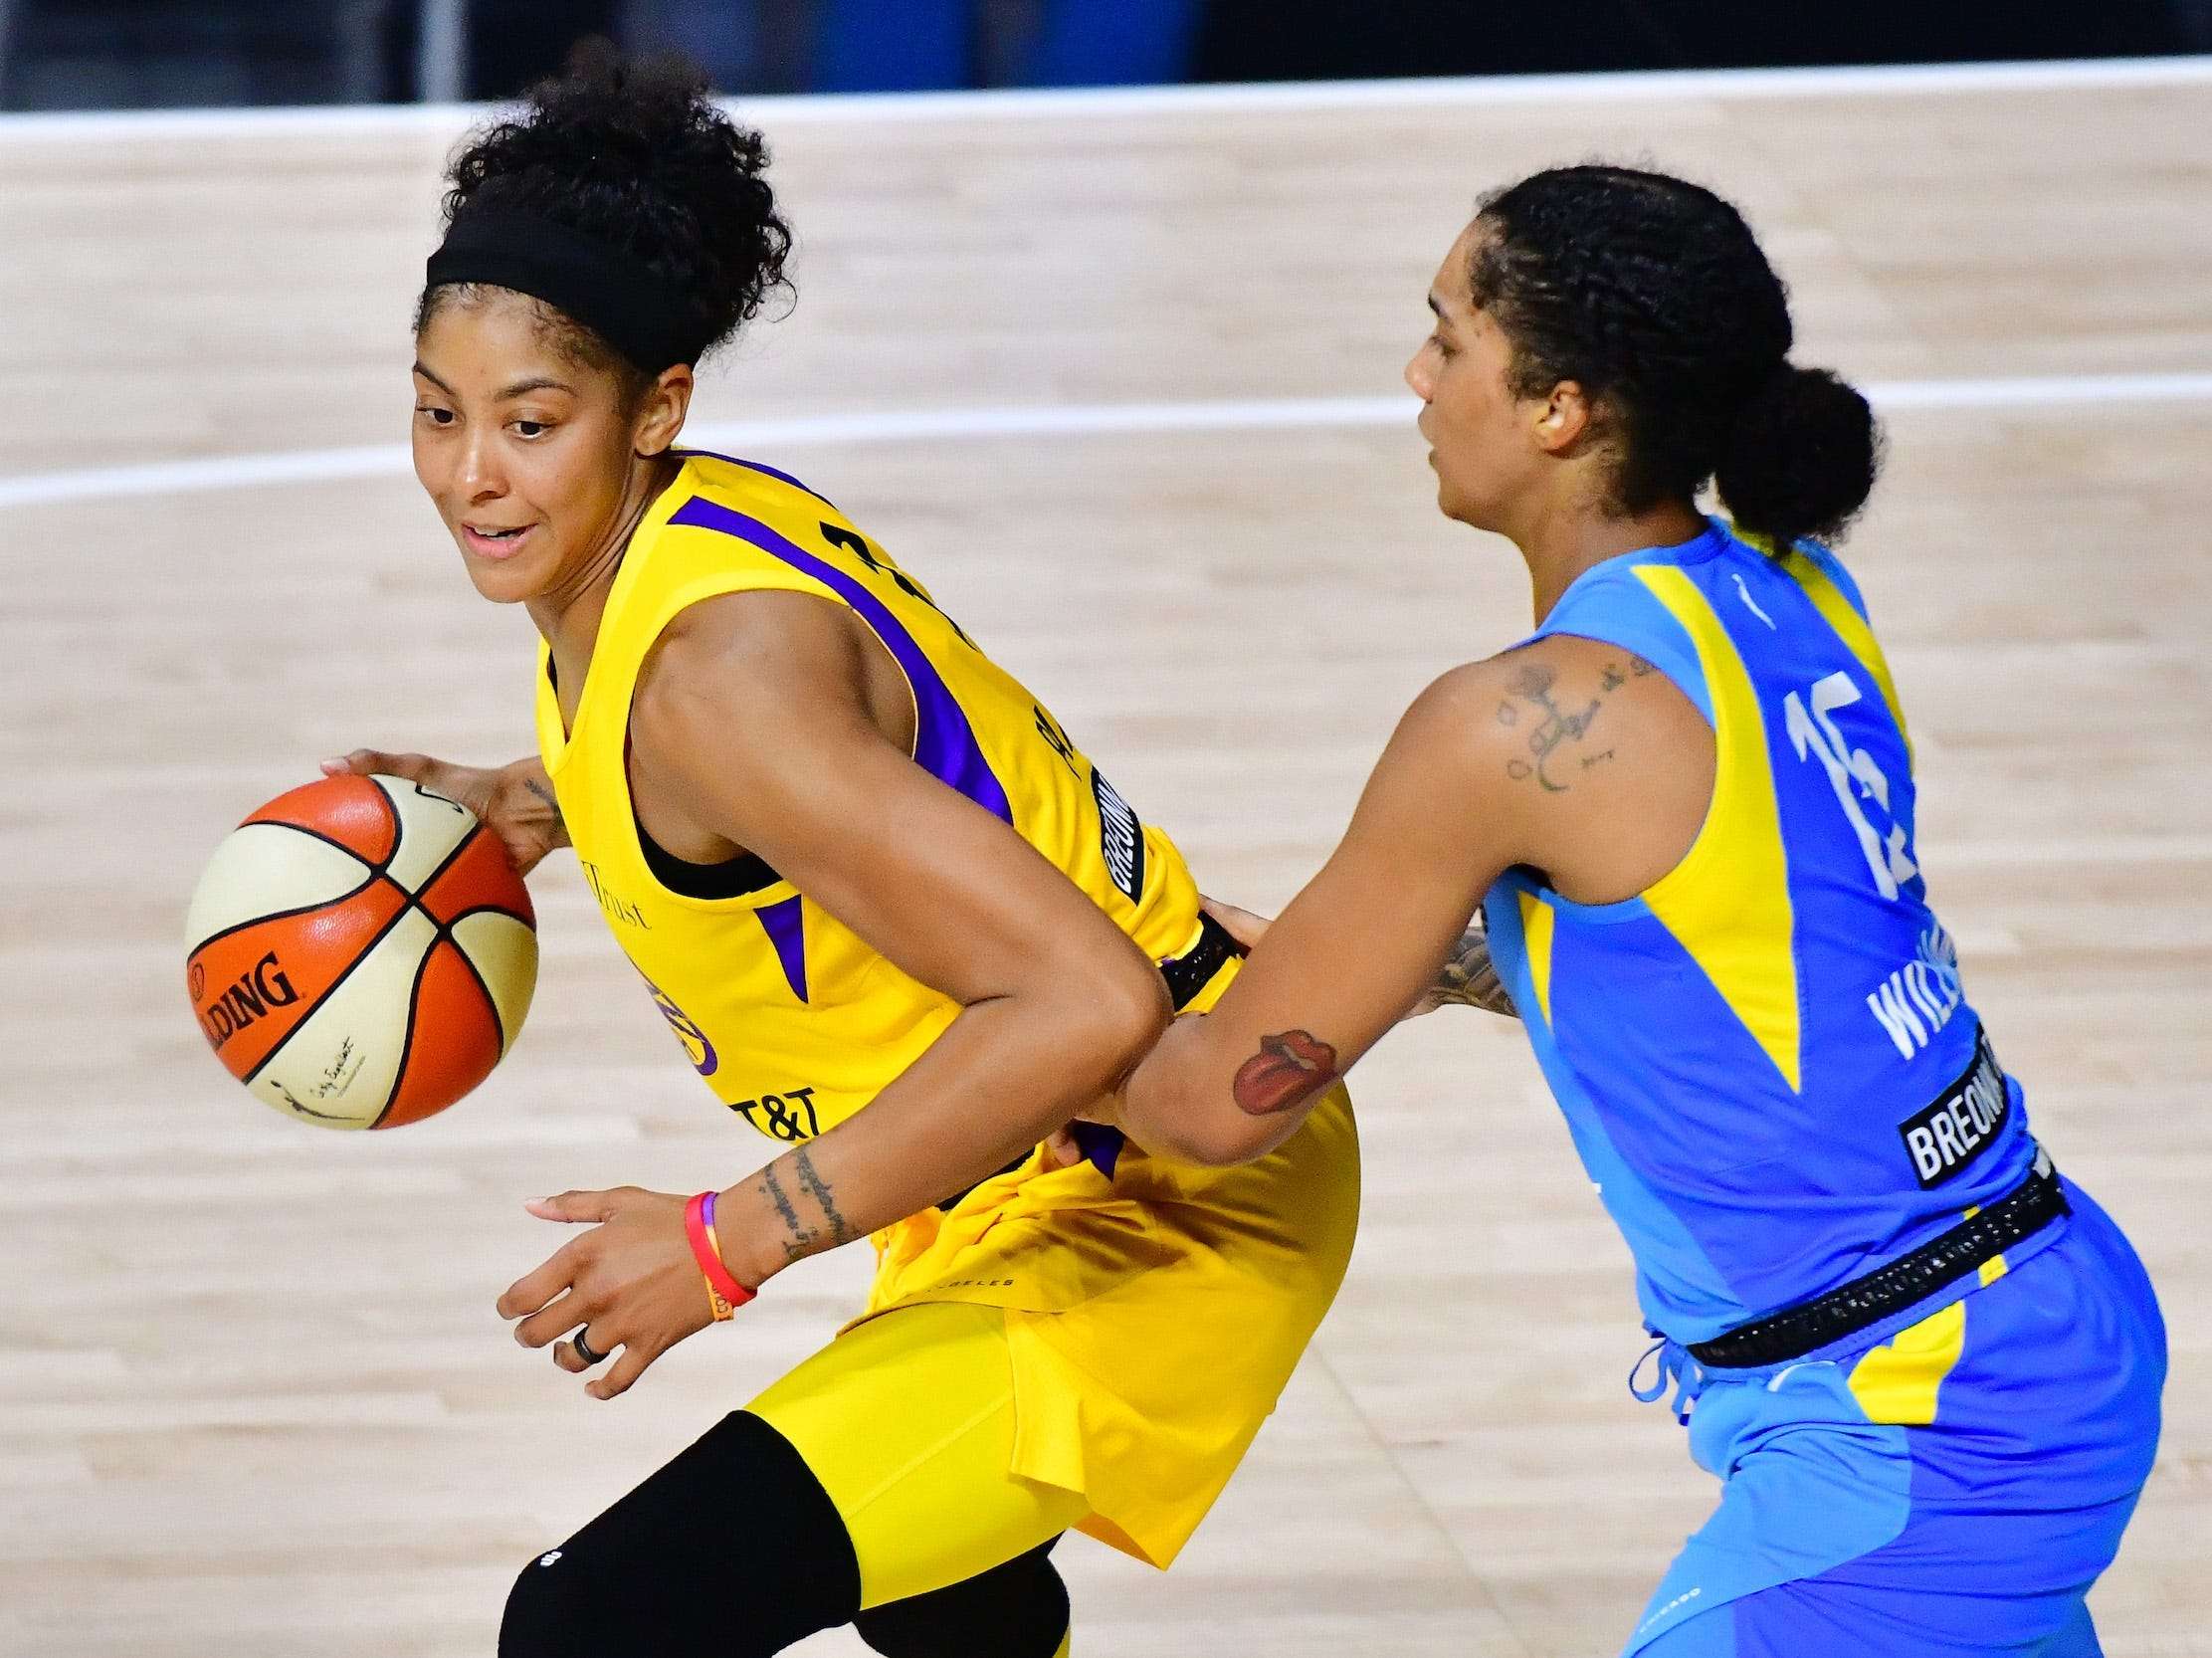 WNBA Star Candace Parker on Her Continued Collaboration With